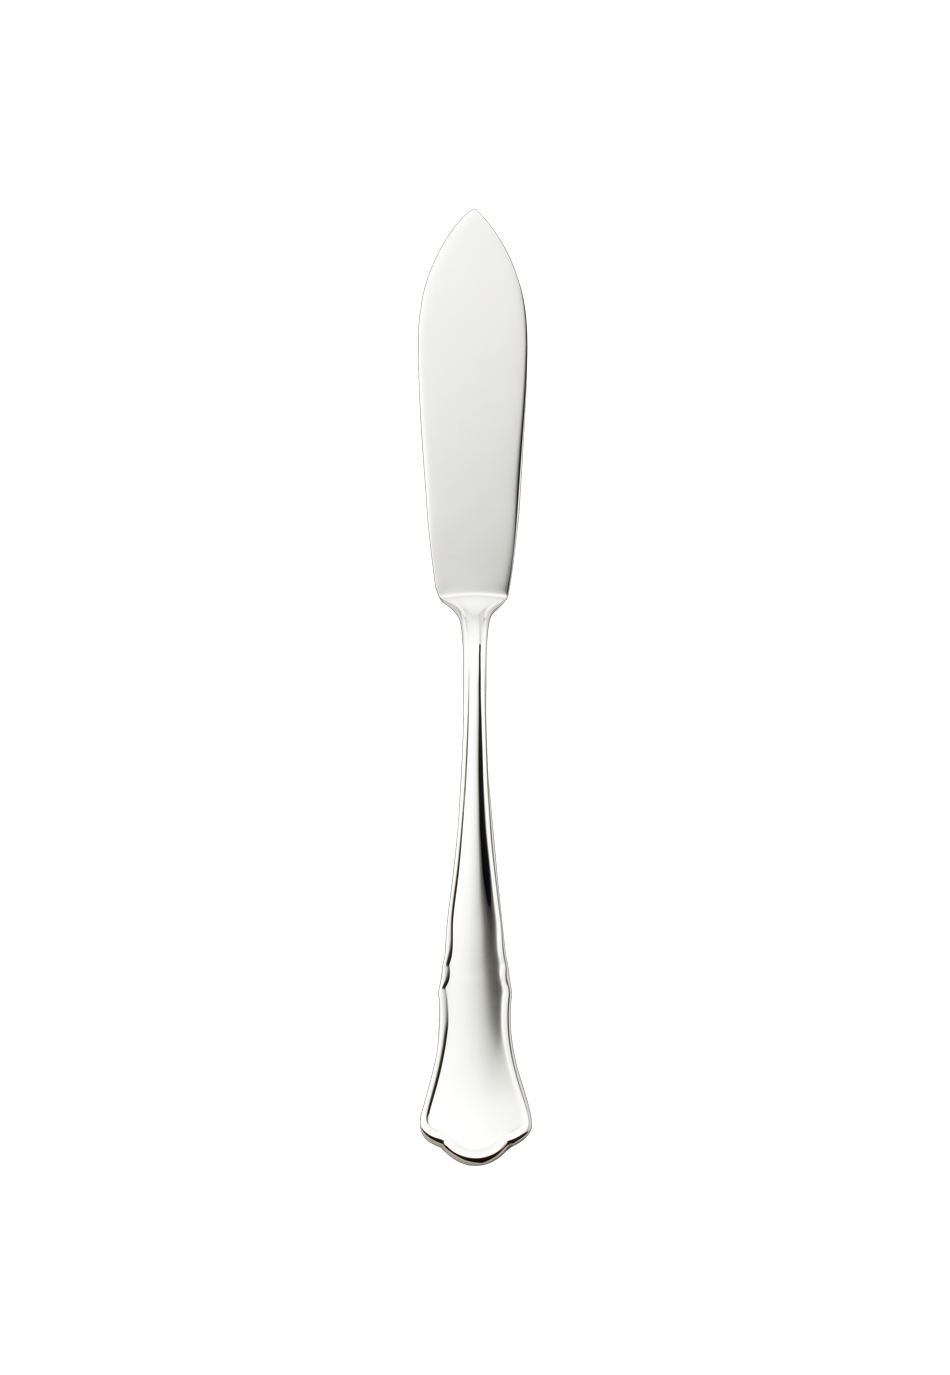 Alt-Chippendale Fish Knife (150g massive silverplated)